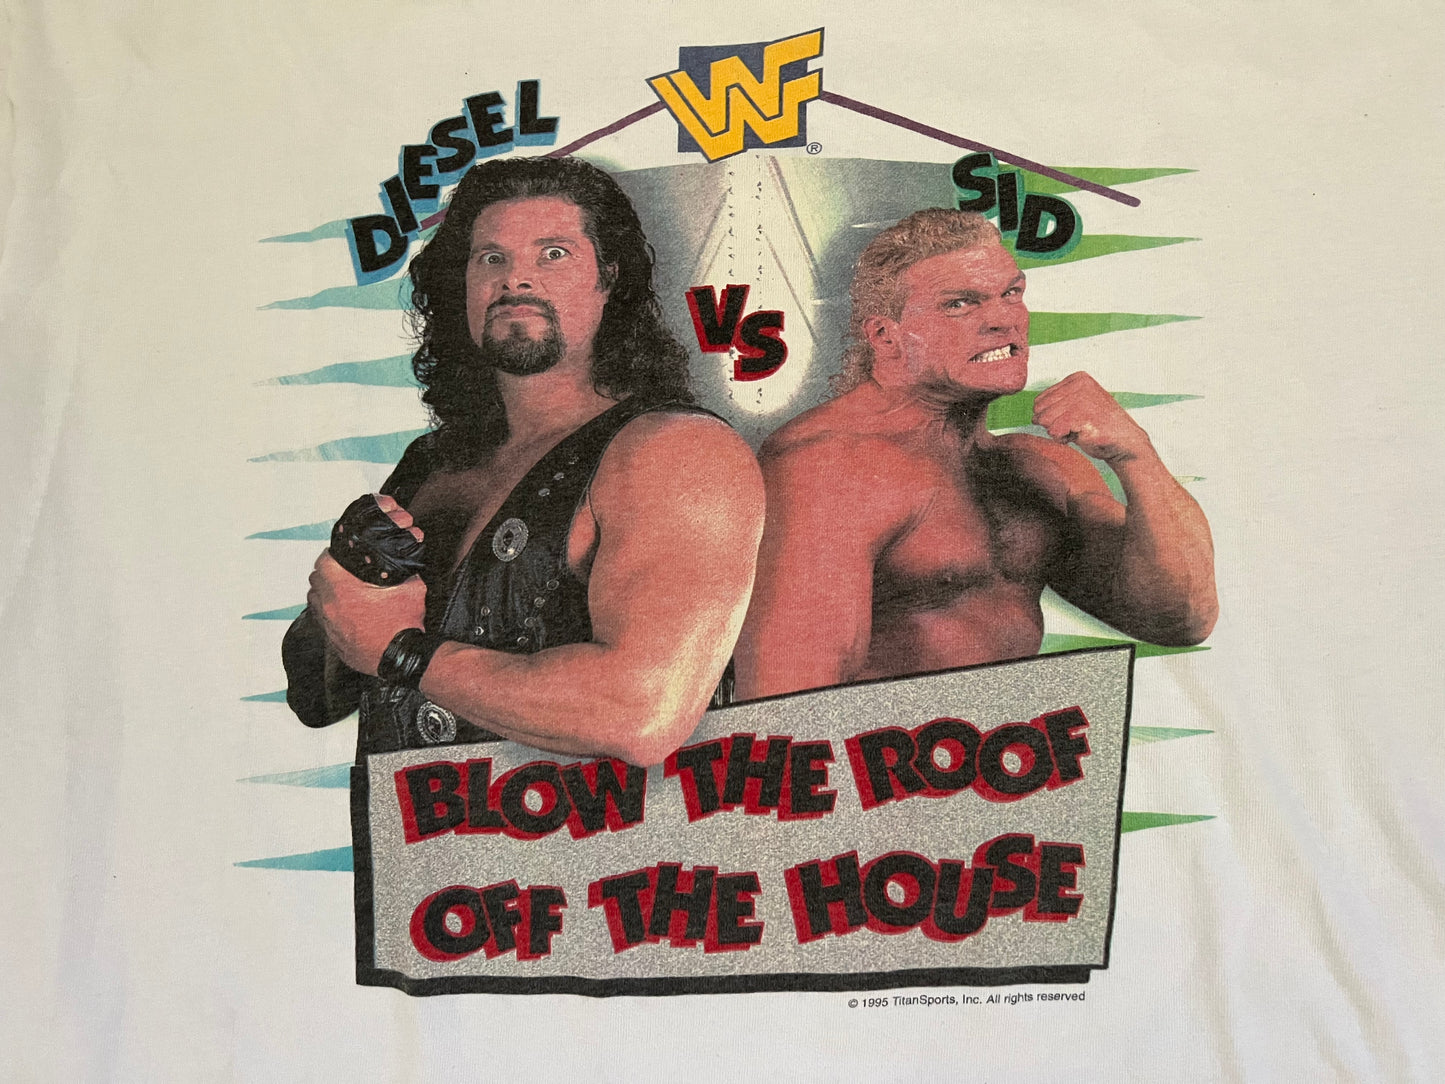 1995 WWF The Night Before IYH 1 “Blow the Roof Off the House” live show from the Boston Garden shirt featuring “Big Daddy Cool” Diesel and Sid